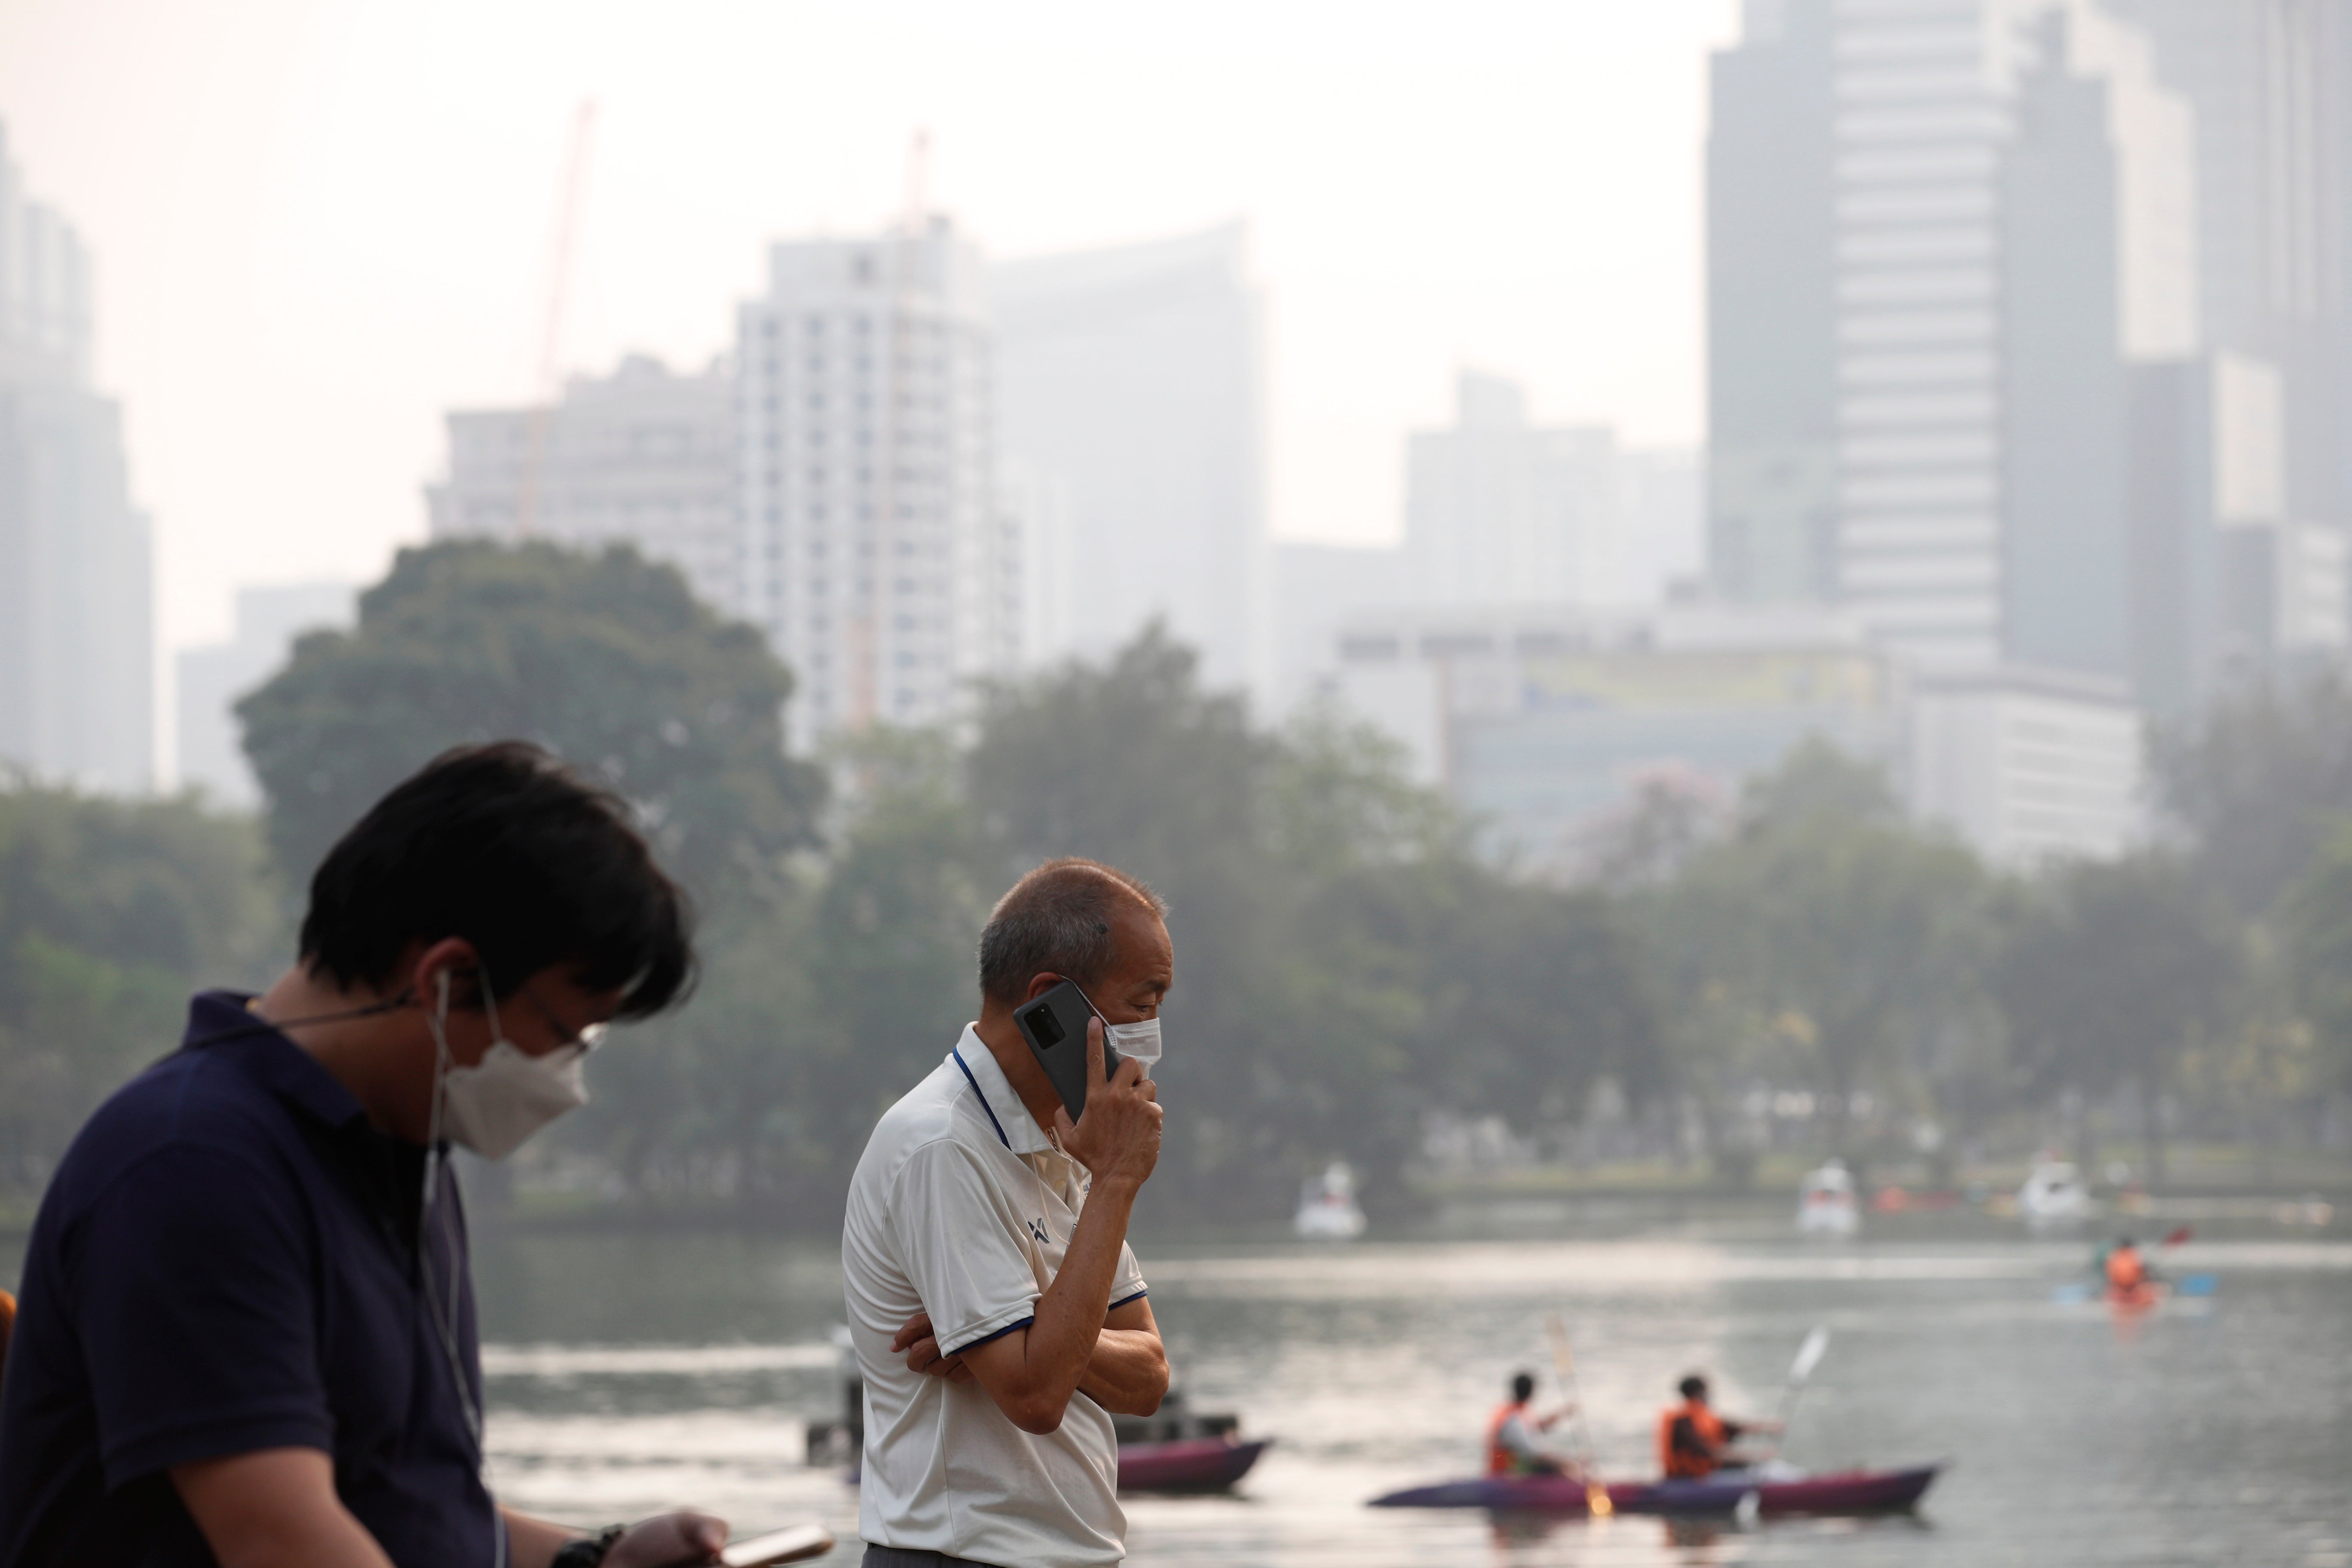 People wear face masks as high-rise buildings are shrouded in smog and haze from heavy fine dust at Lumpini Park in Bangkok